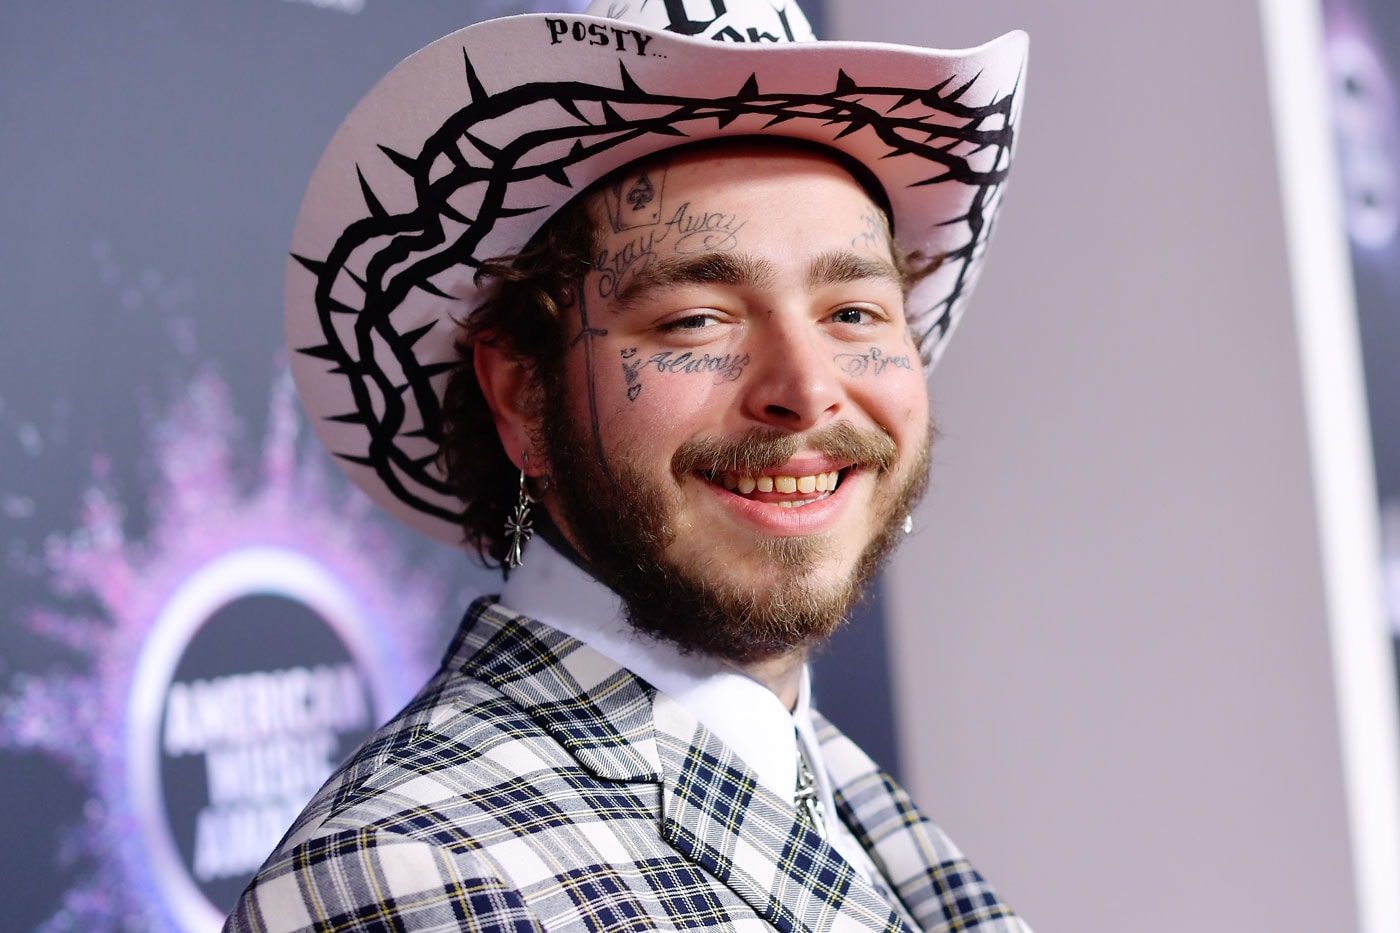 Post Malone Names His Chains After '90s "Boy Bandz"